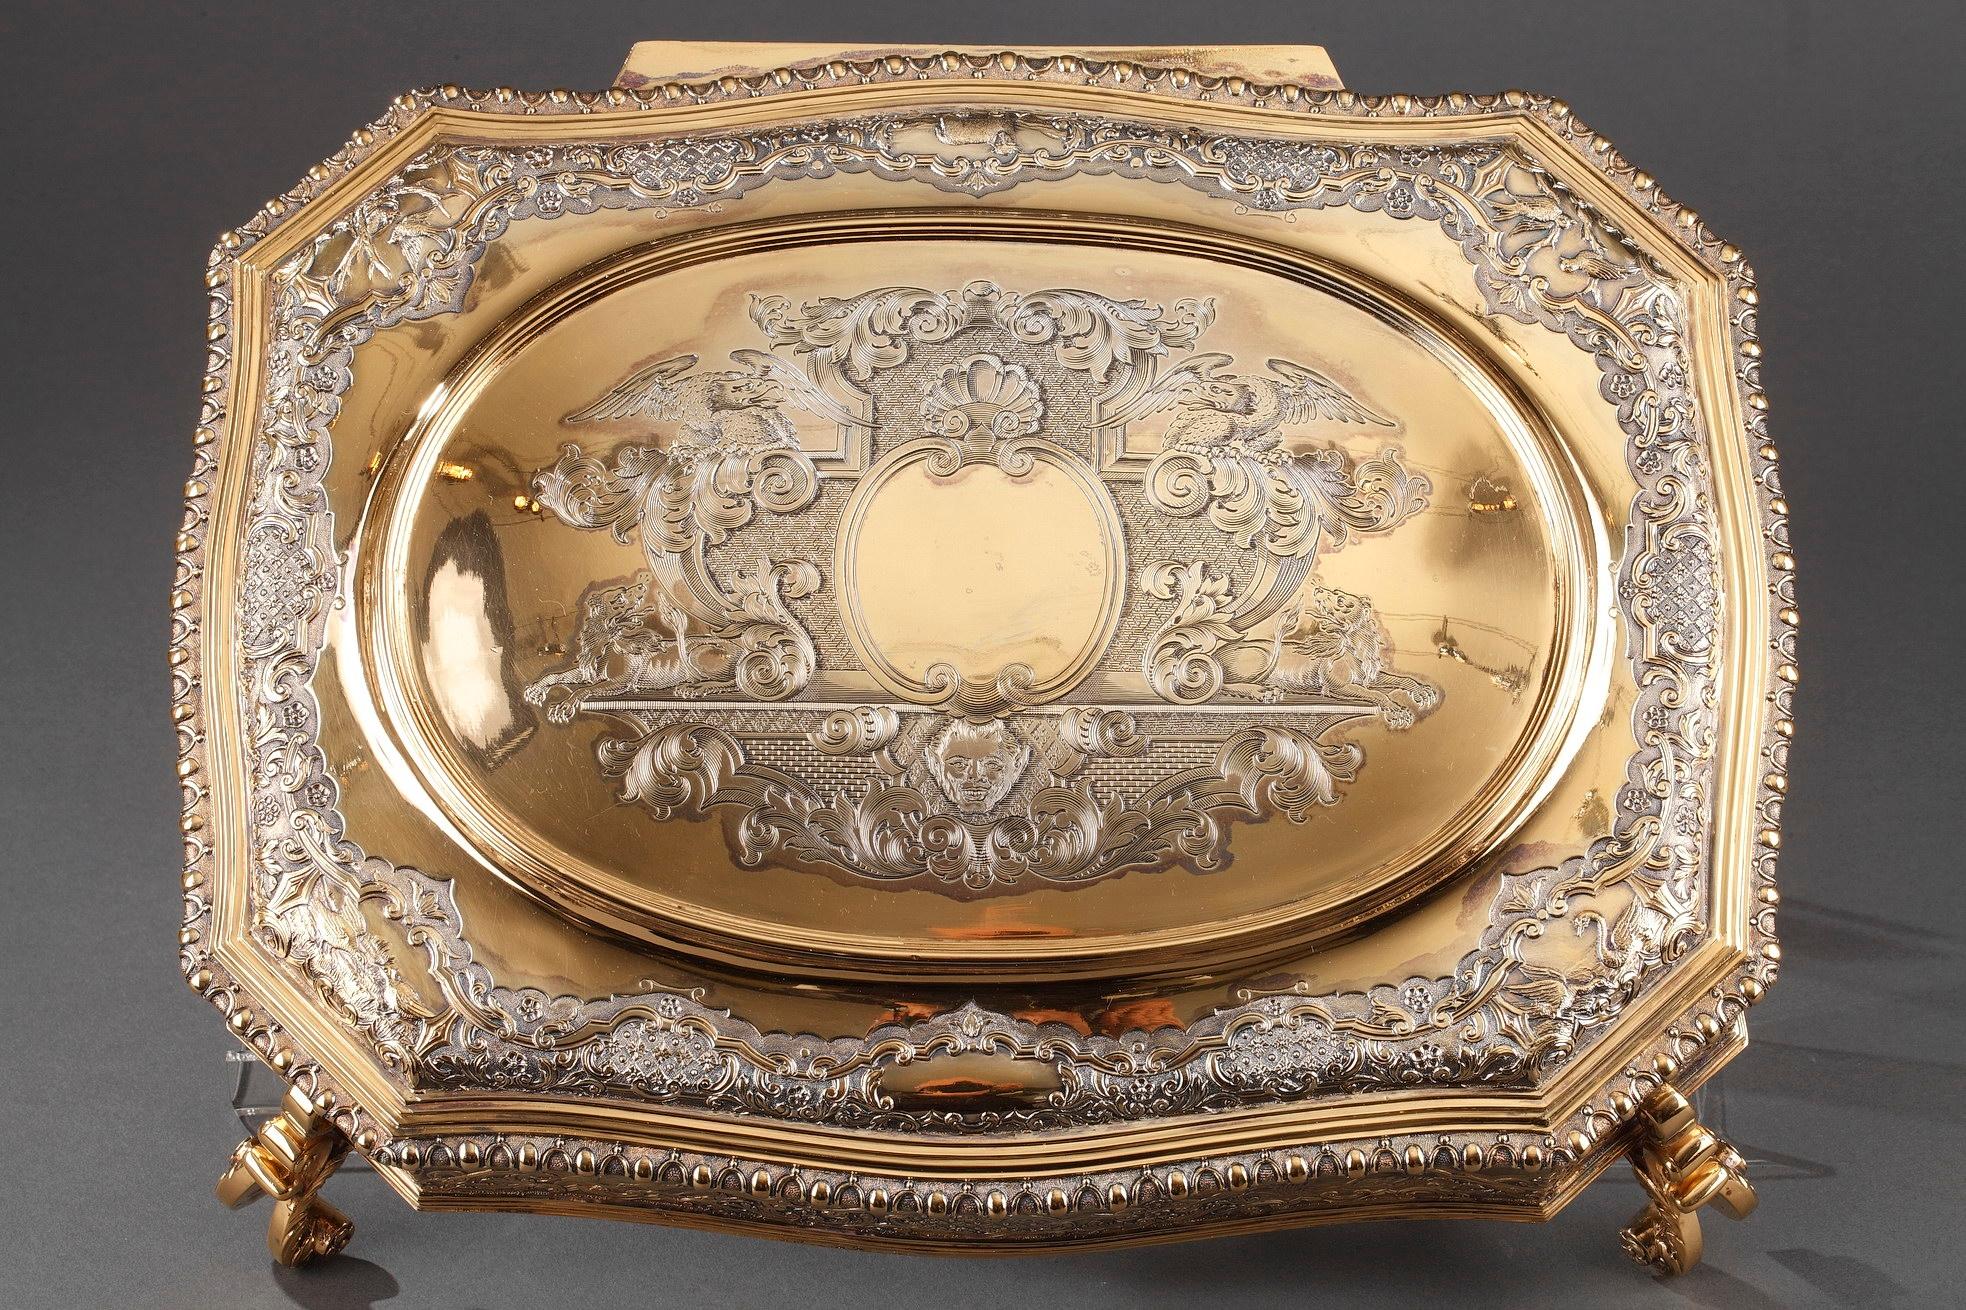 Silver-Gilt Dressing-Table Service by Lionel Alfred Crichton, London, 1917 For Sale 4